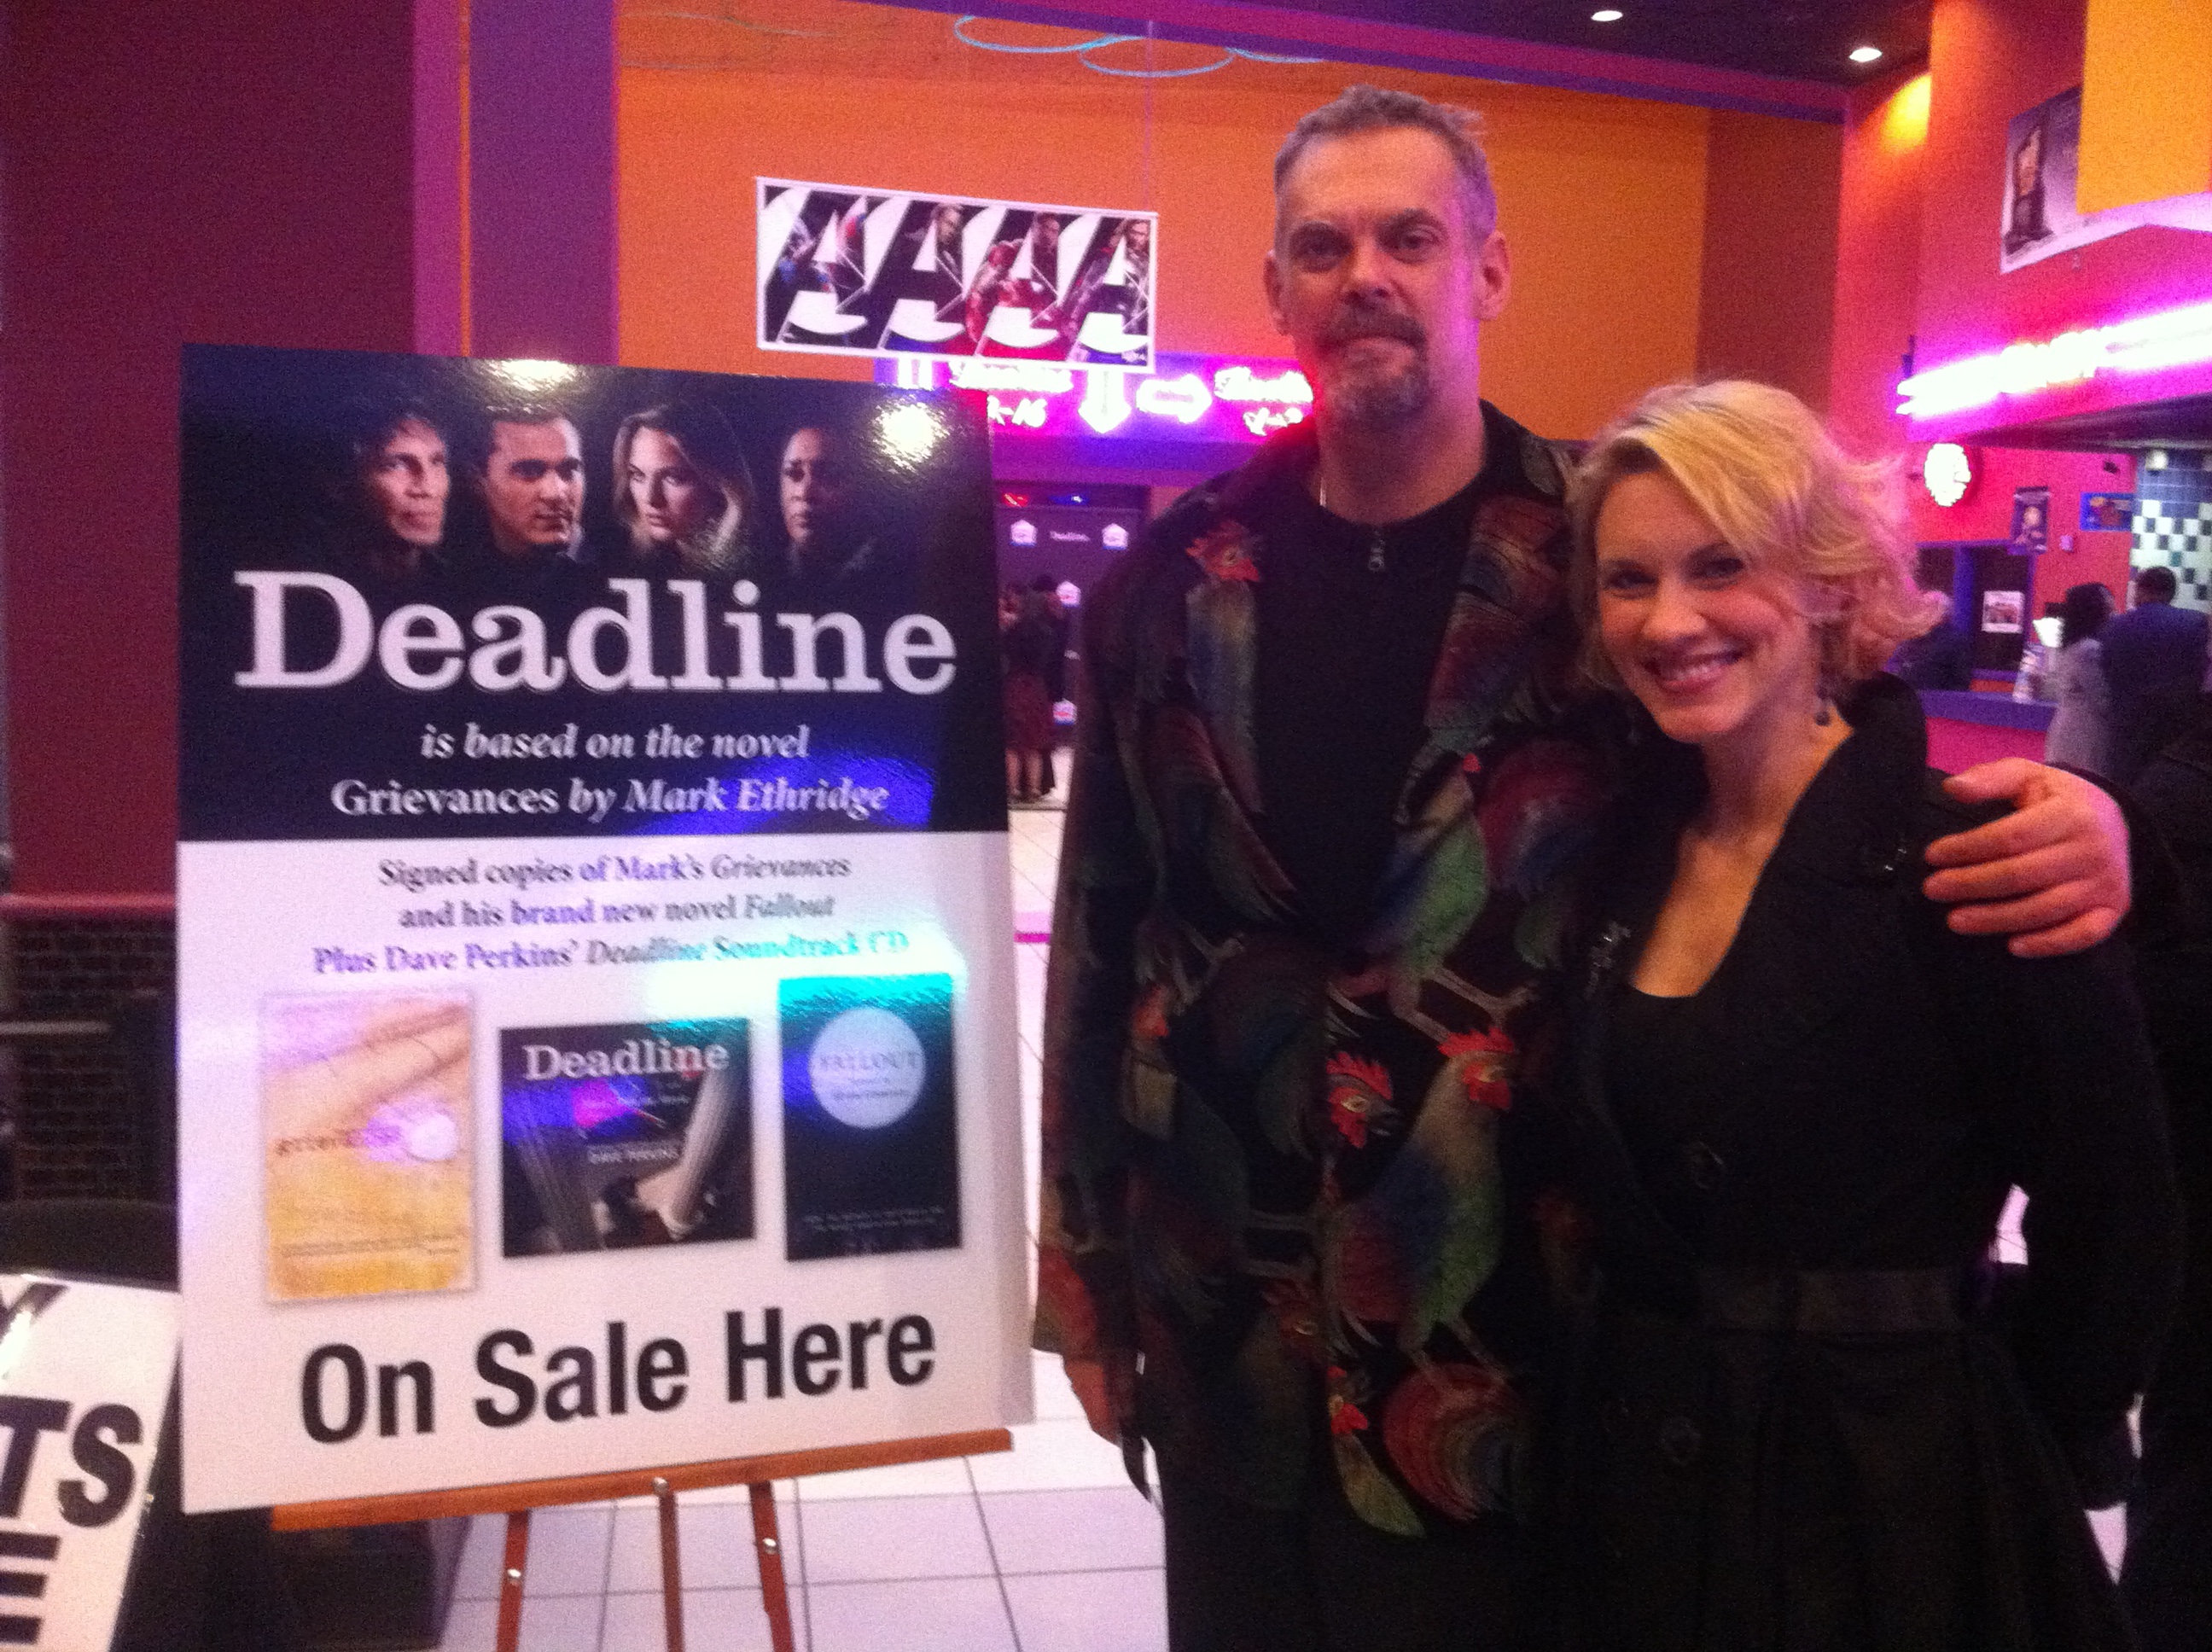 Jeremy Childs and Carrie Tillis on the red carpet for Deadline.